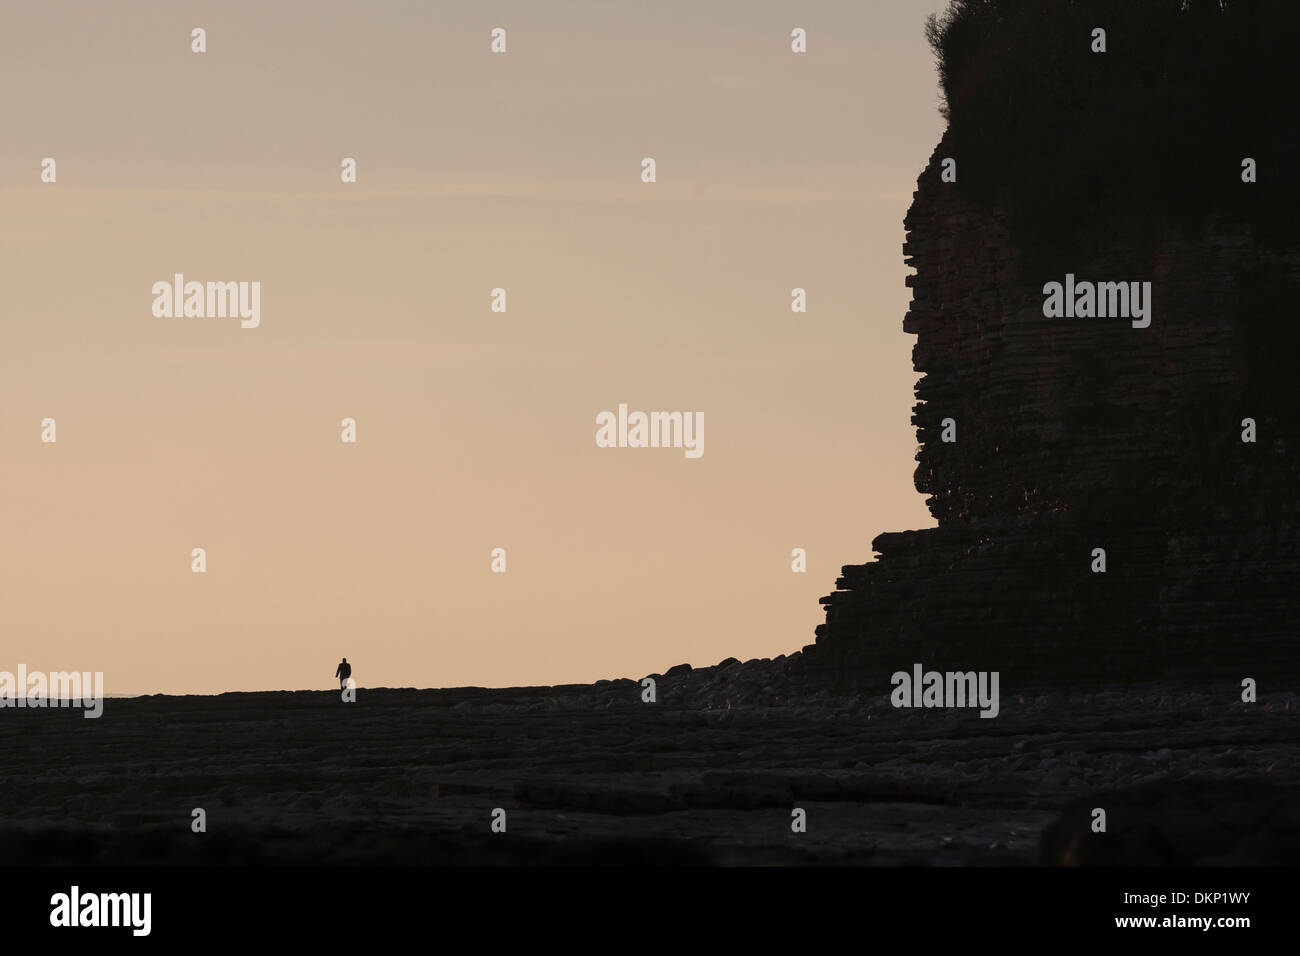 Distant lone figure dwarfed by massive cliff at dusk Stock Photo